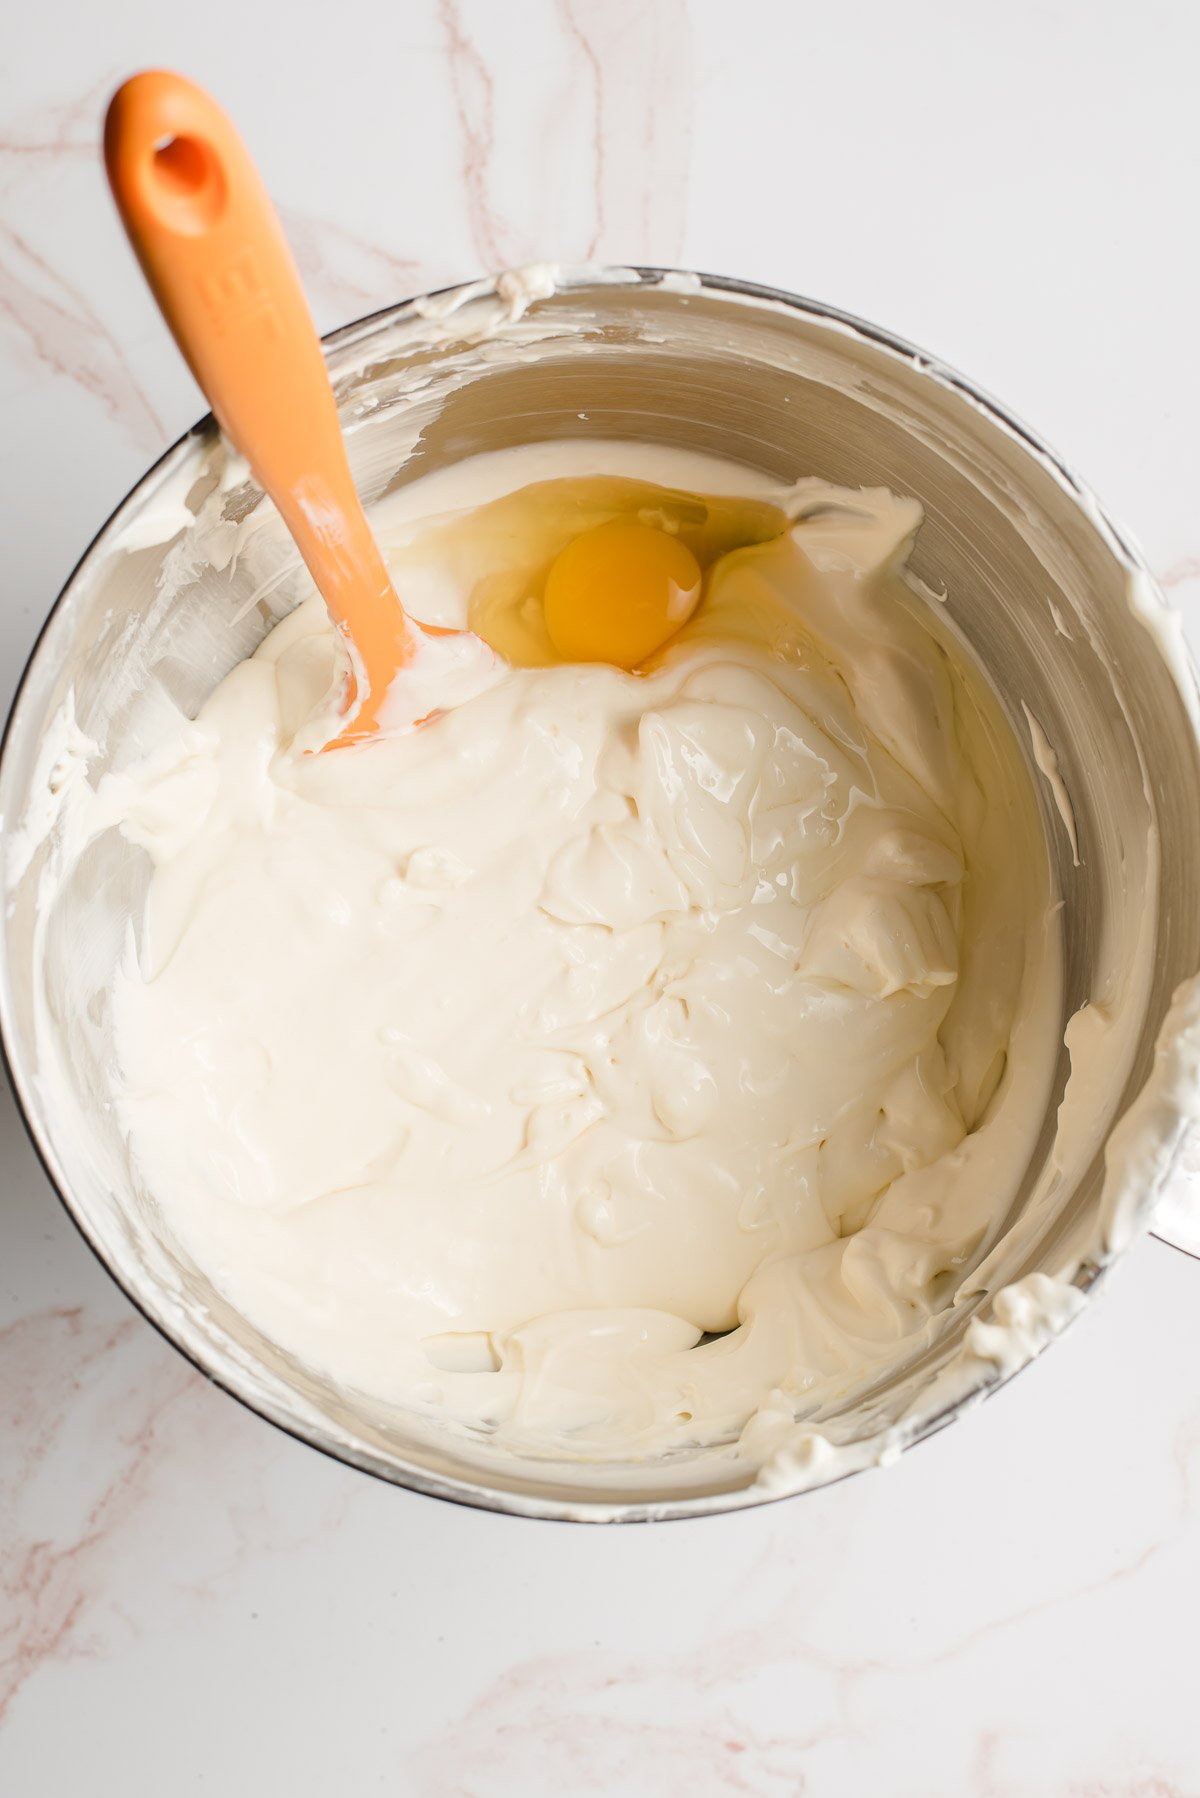 Electric mixer bowl with cream cheese, sugar, and egg.